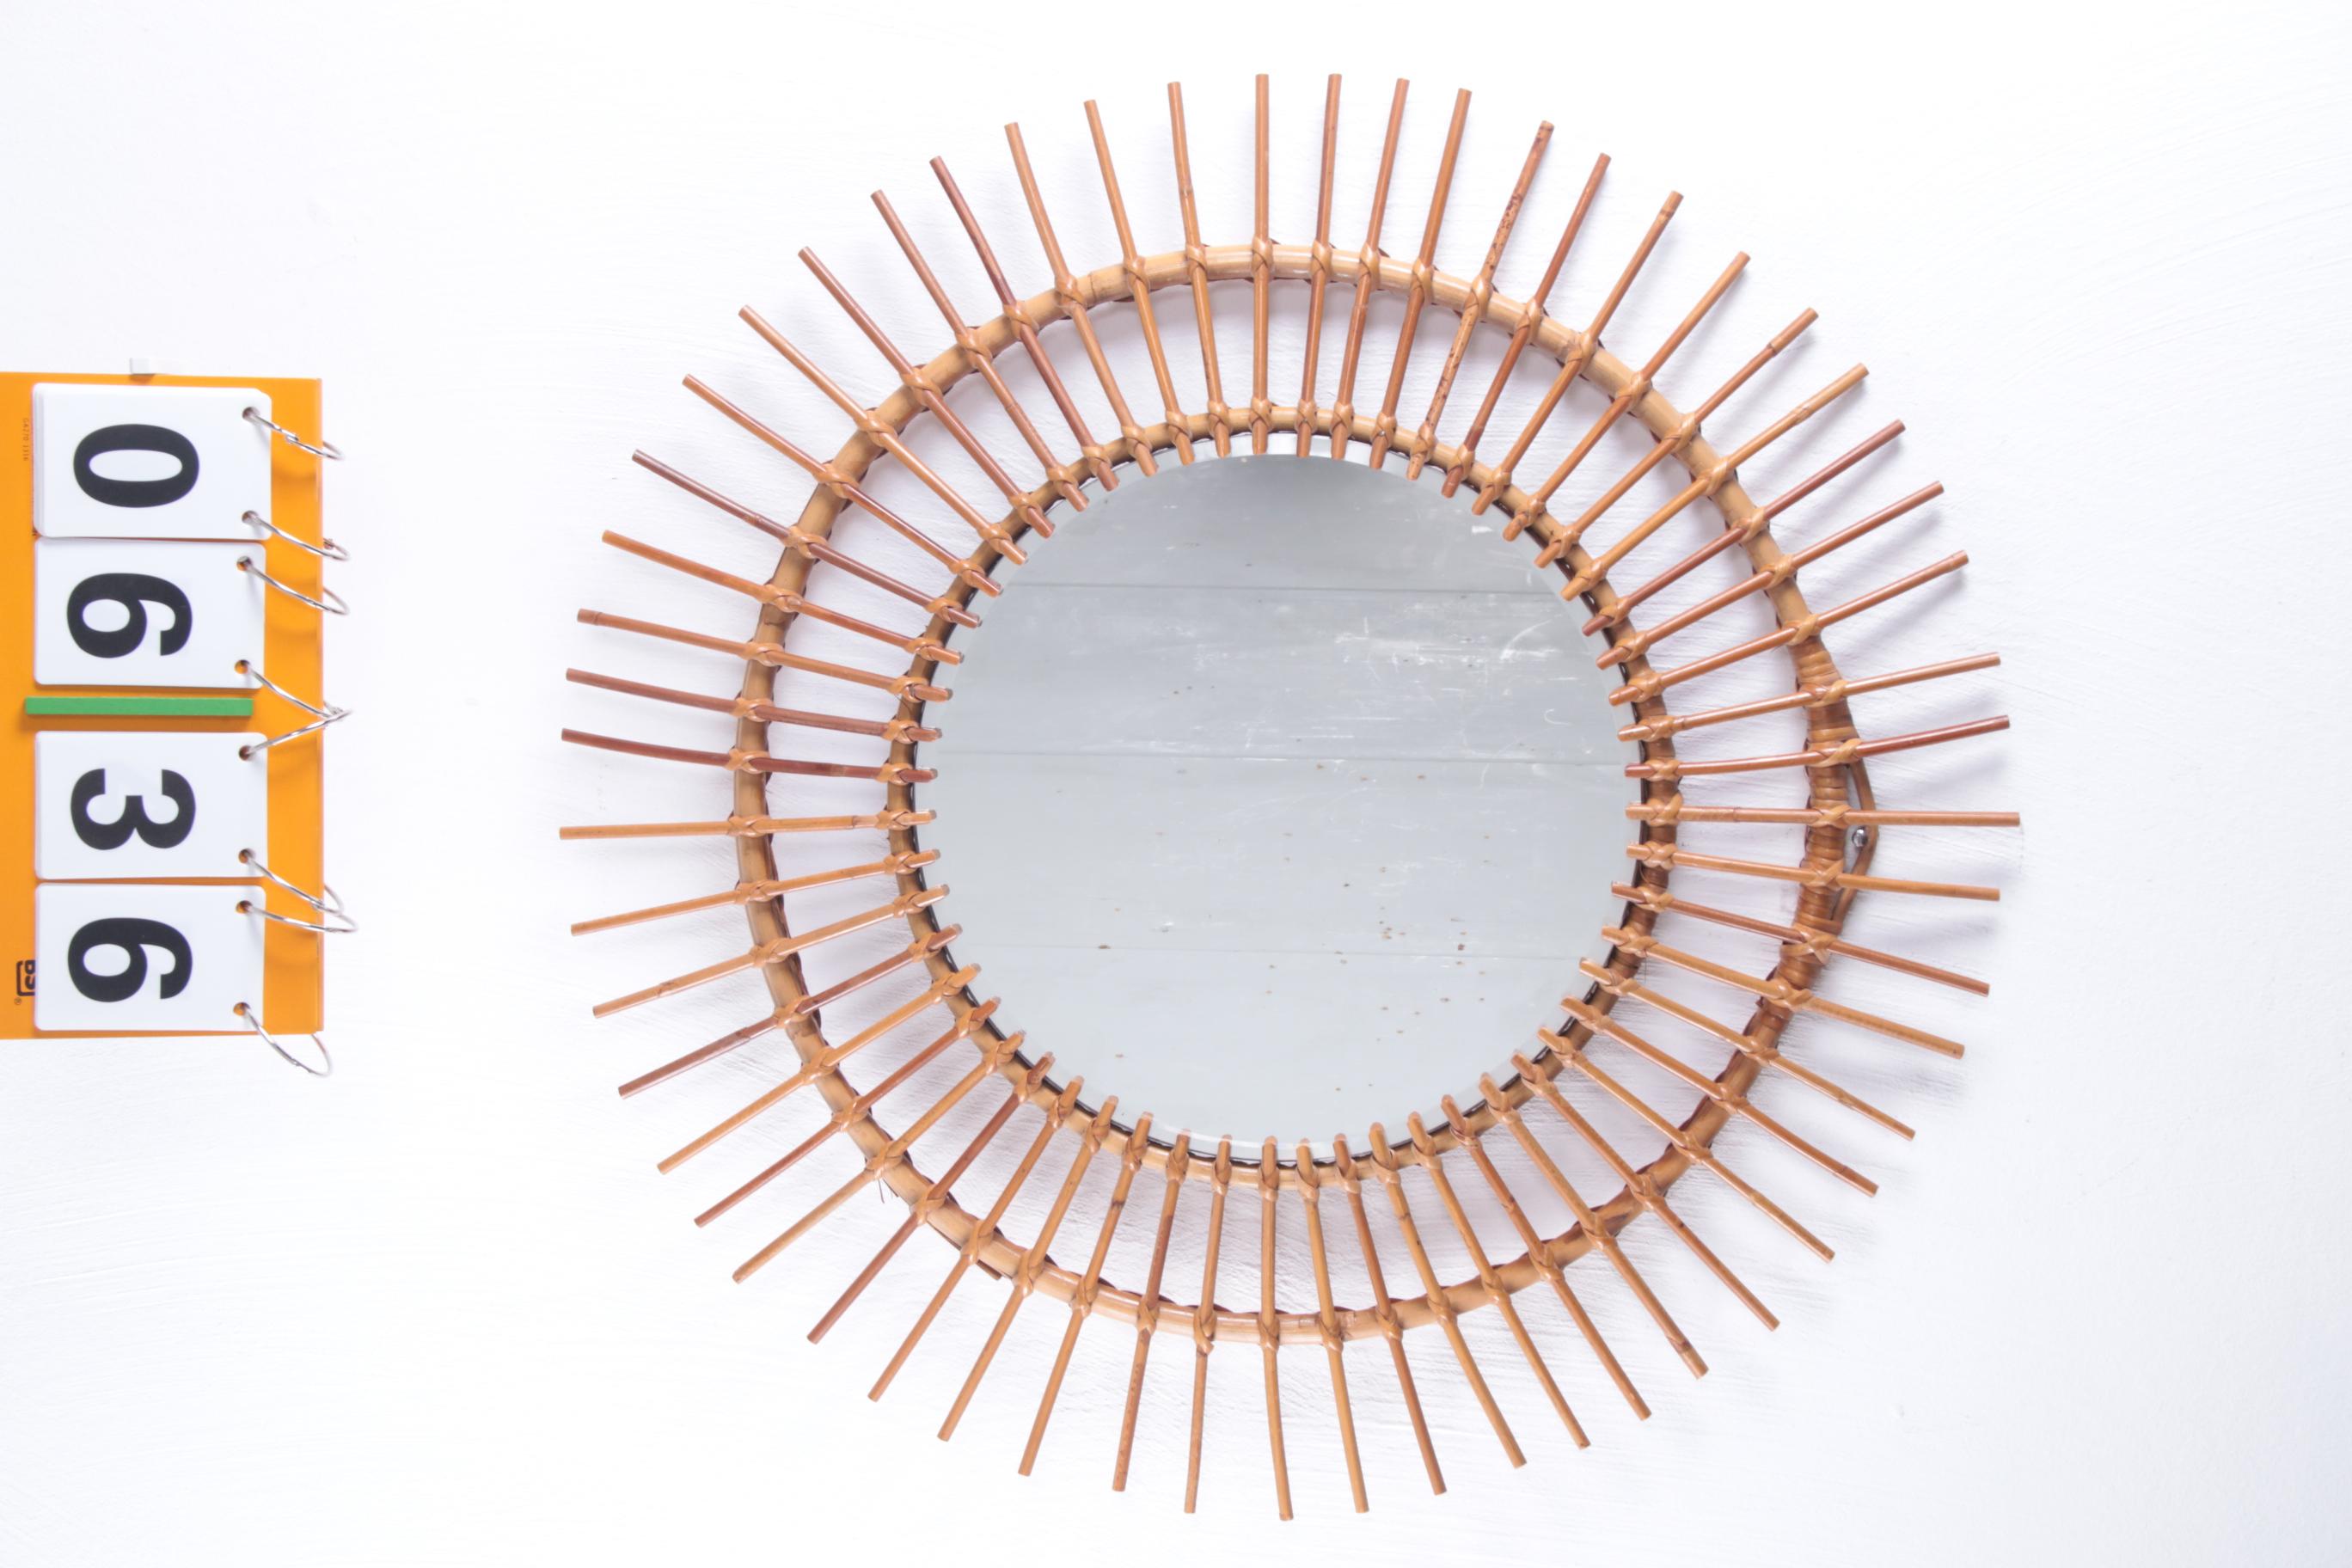 French Round Rattan Mirror Bohemian Style

Additional information: 
Dimensions: 70 W x 3 D x 70 H cm 
Period of Time: 1960
Country of origin: France
Condition: In very good condition